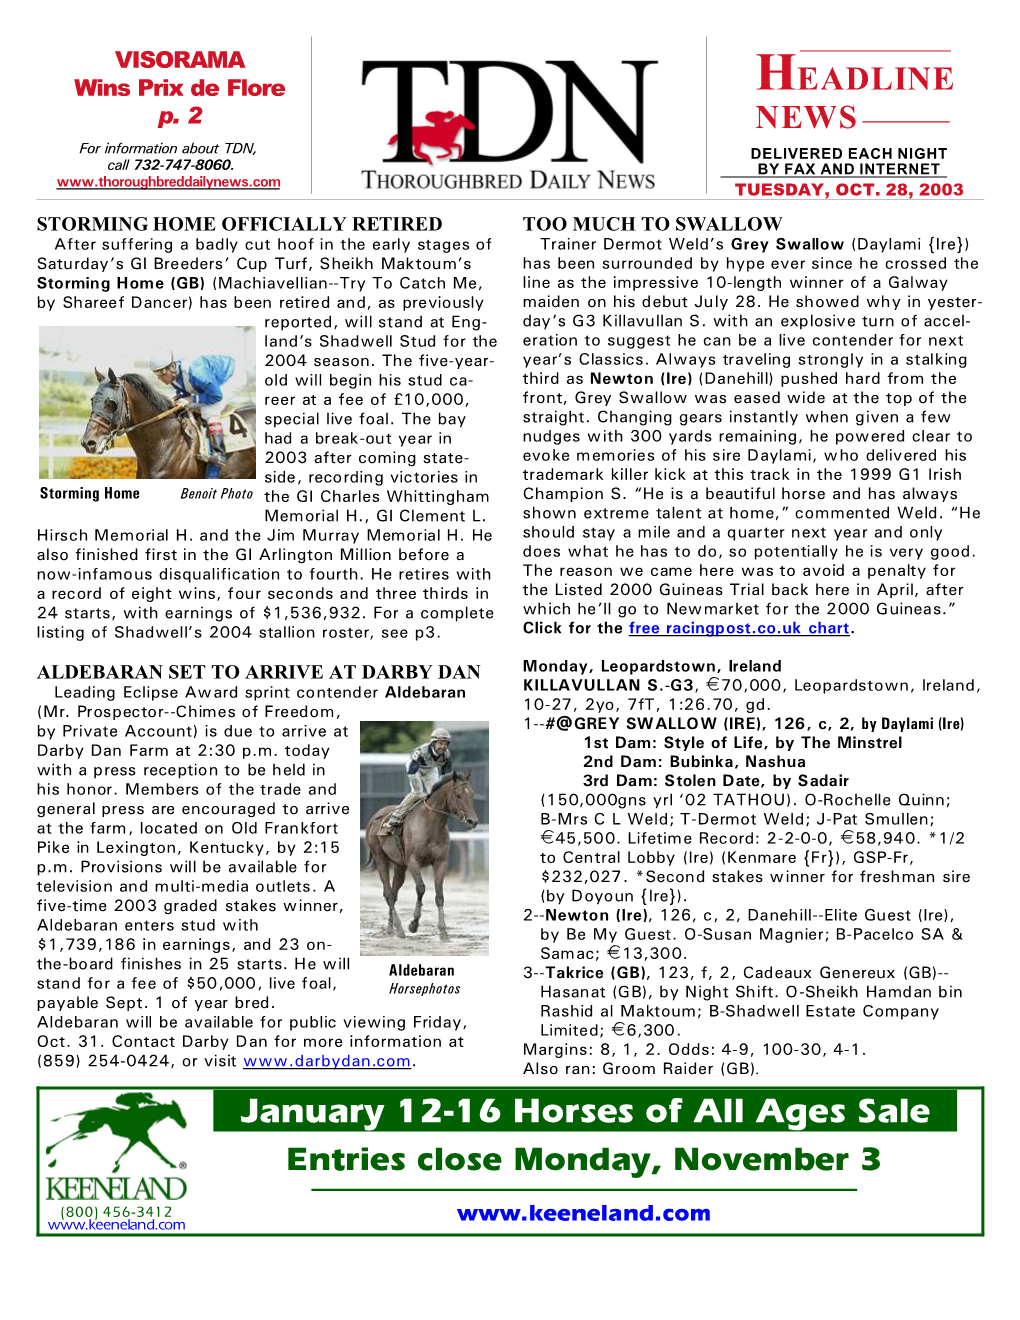 January 12-16 Horses of All Ages Sale Entries Close Monday, November 3